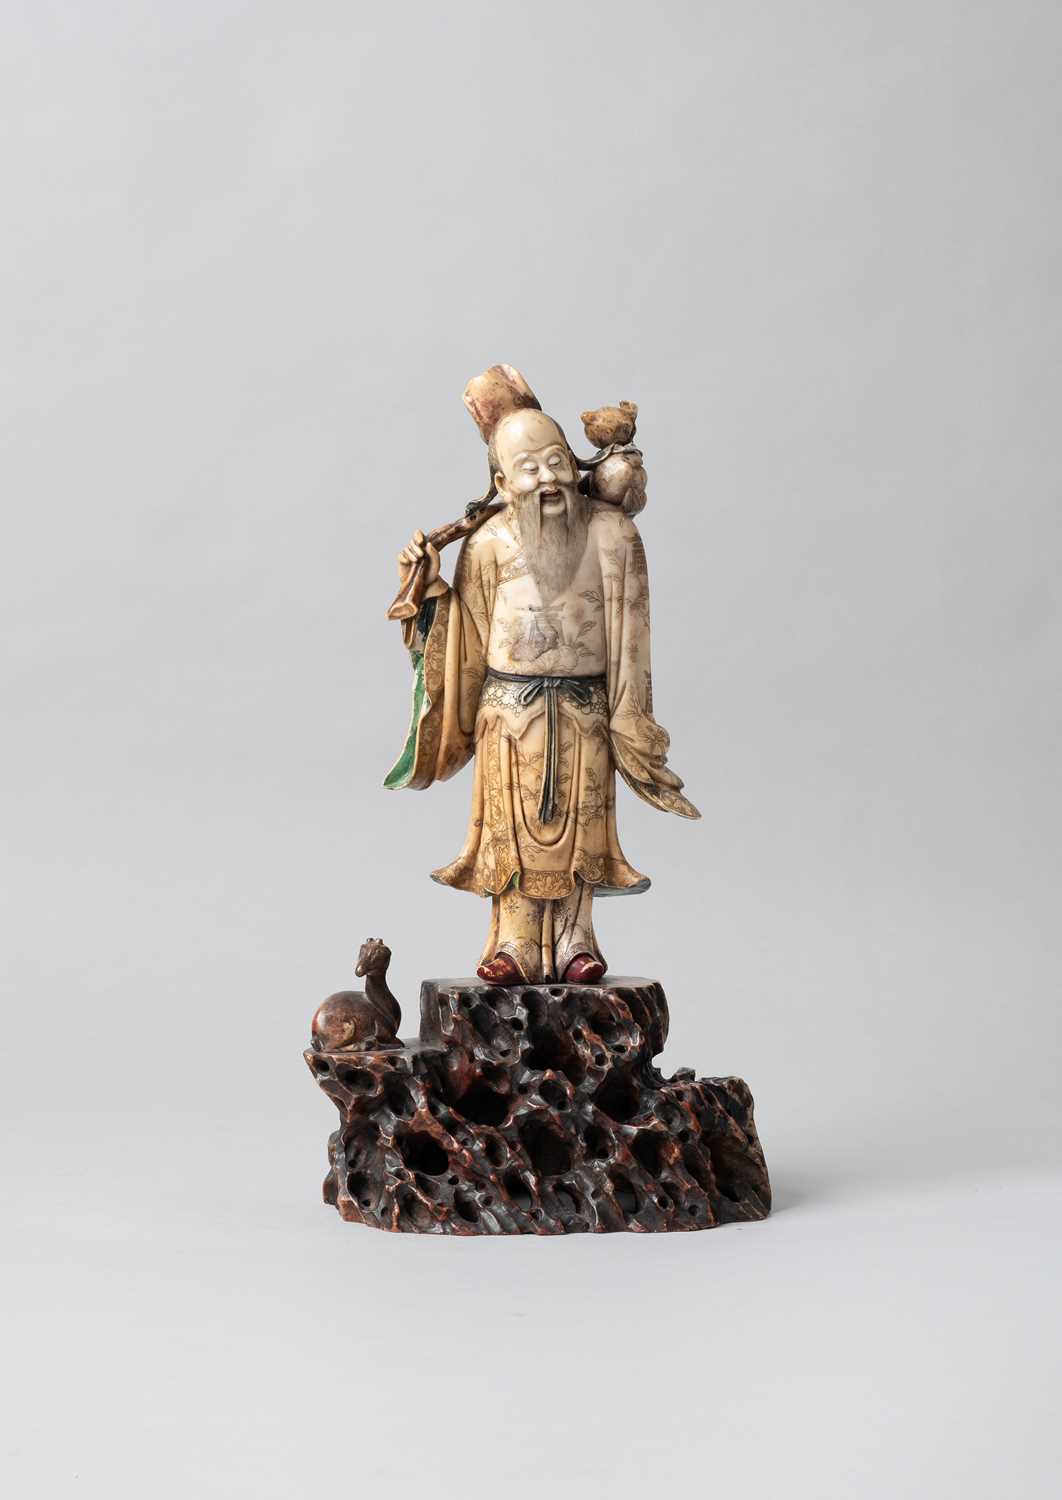 A LARGE CHINESE SOAPSTONE FIGURE OF SHOULAO 17TH CENTURY The God of Longevity with his distinctive